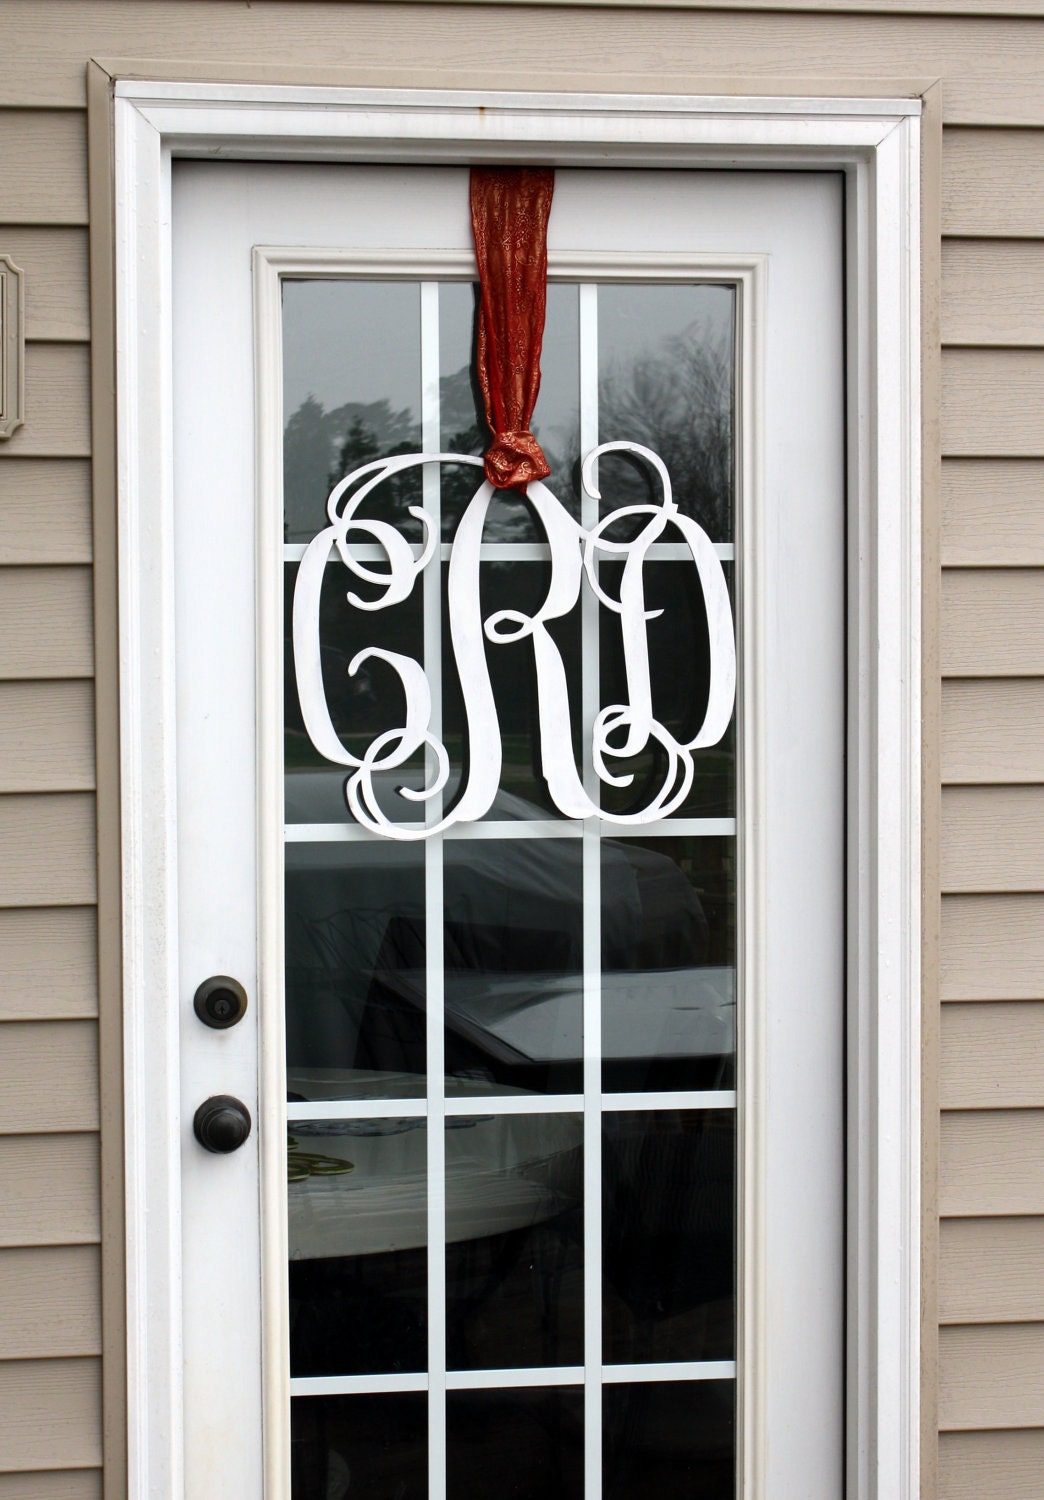 Large (18") Wooden Monogram-Ready to Paint-Monogram your Home